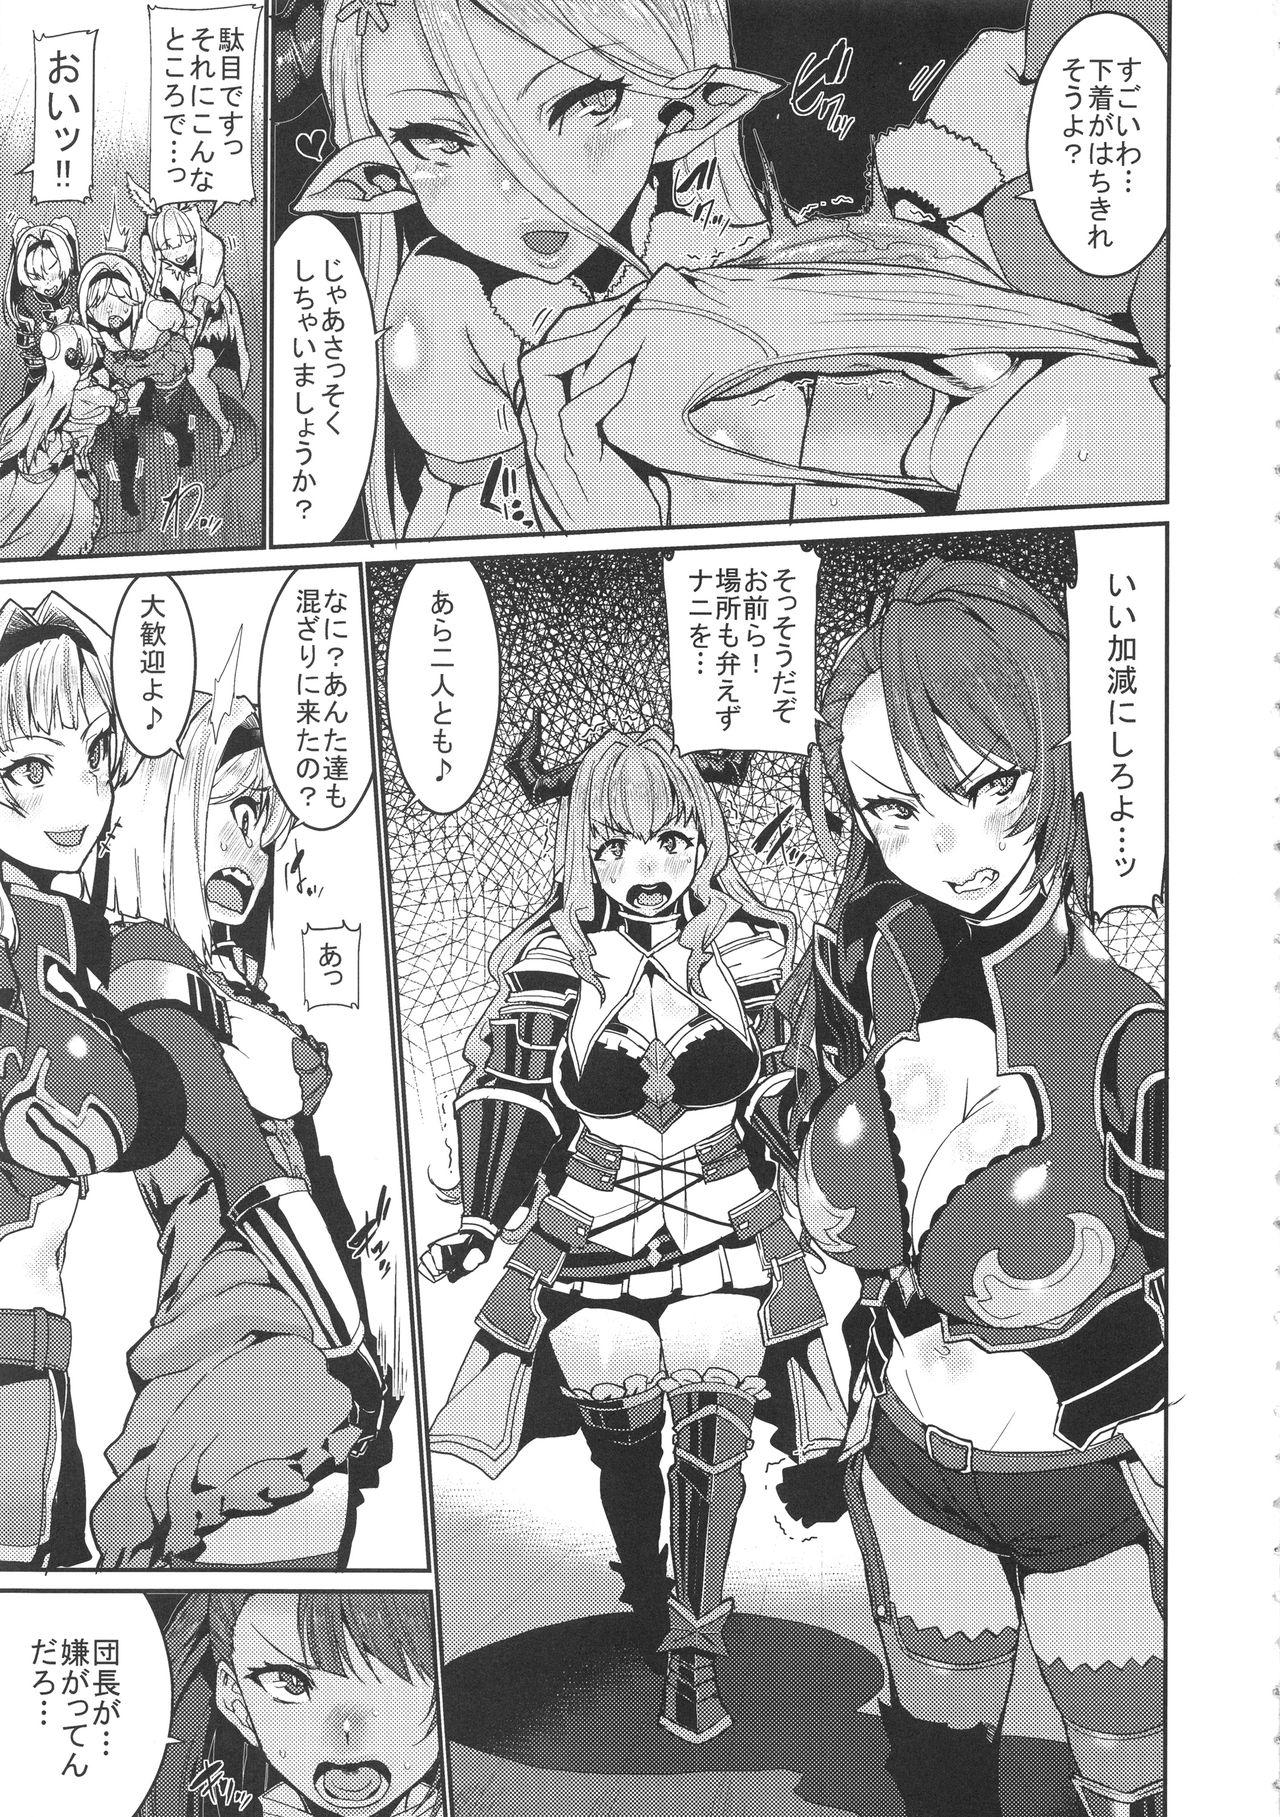 Shoes Be covered, be smeared - Granblue fantasy Soft - Page 7